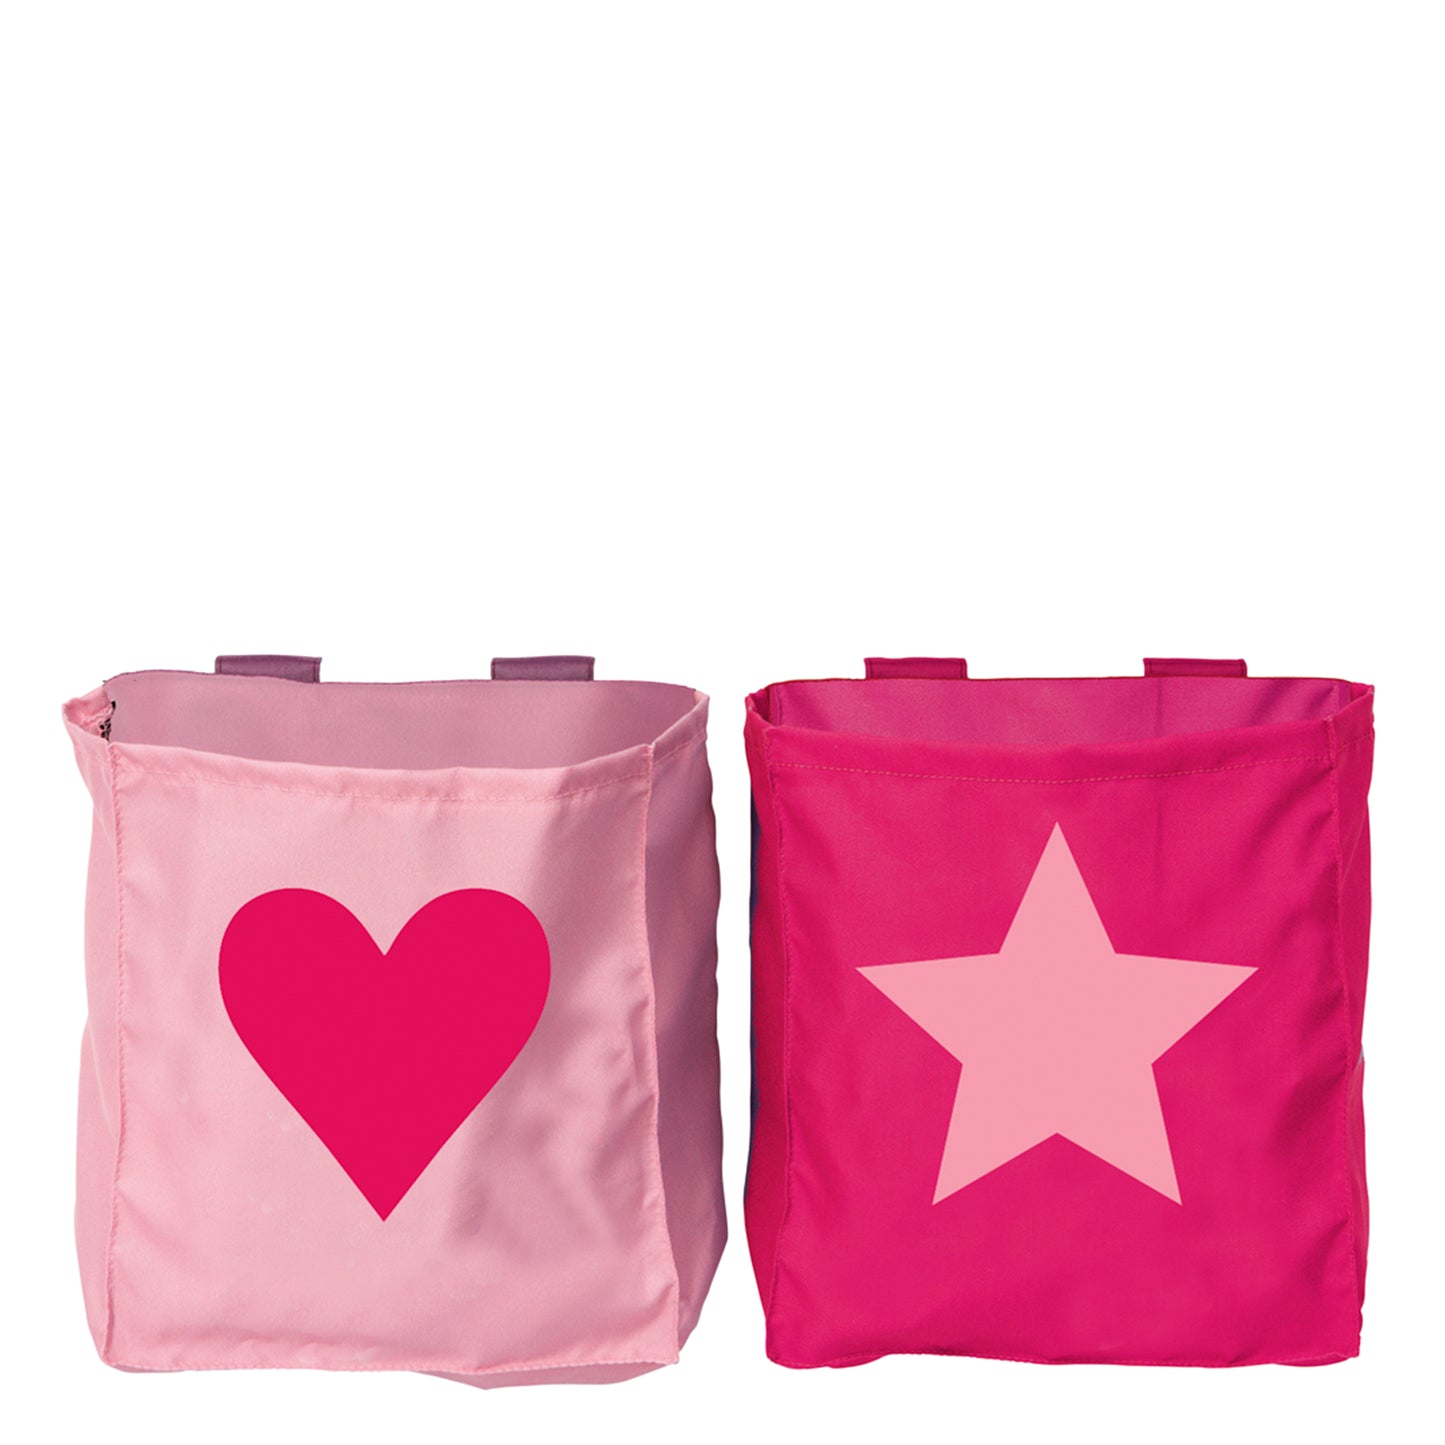 Manis-h  2 Bed Pockets in a Heart & Star Design